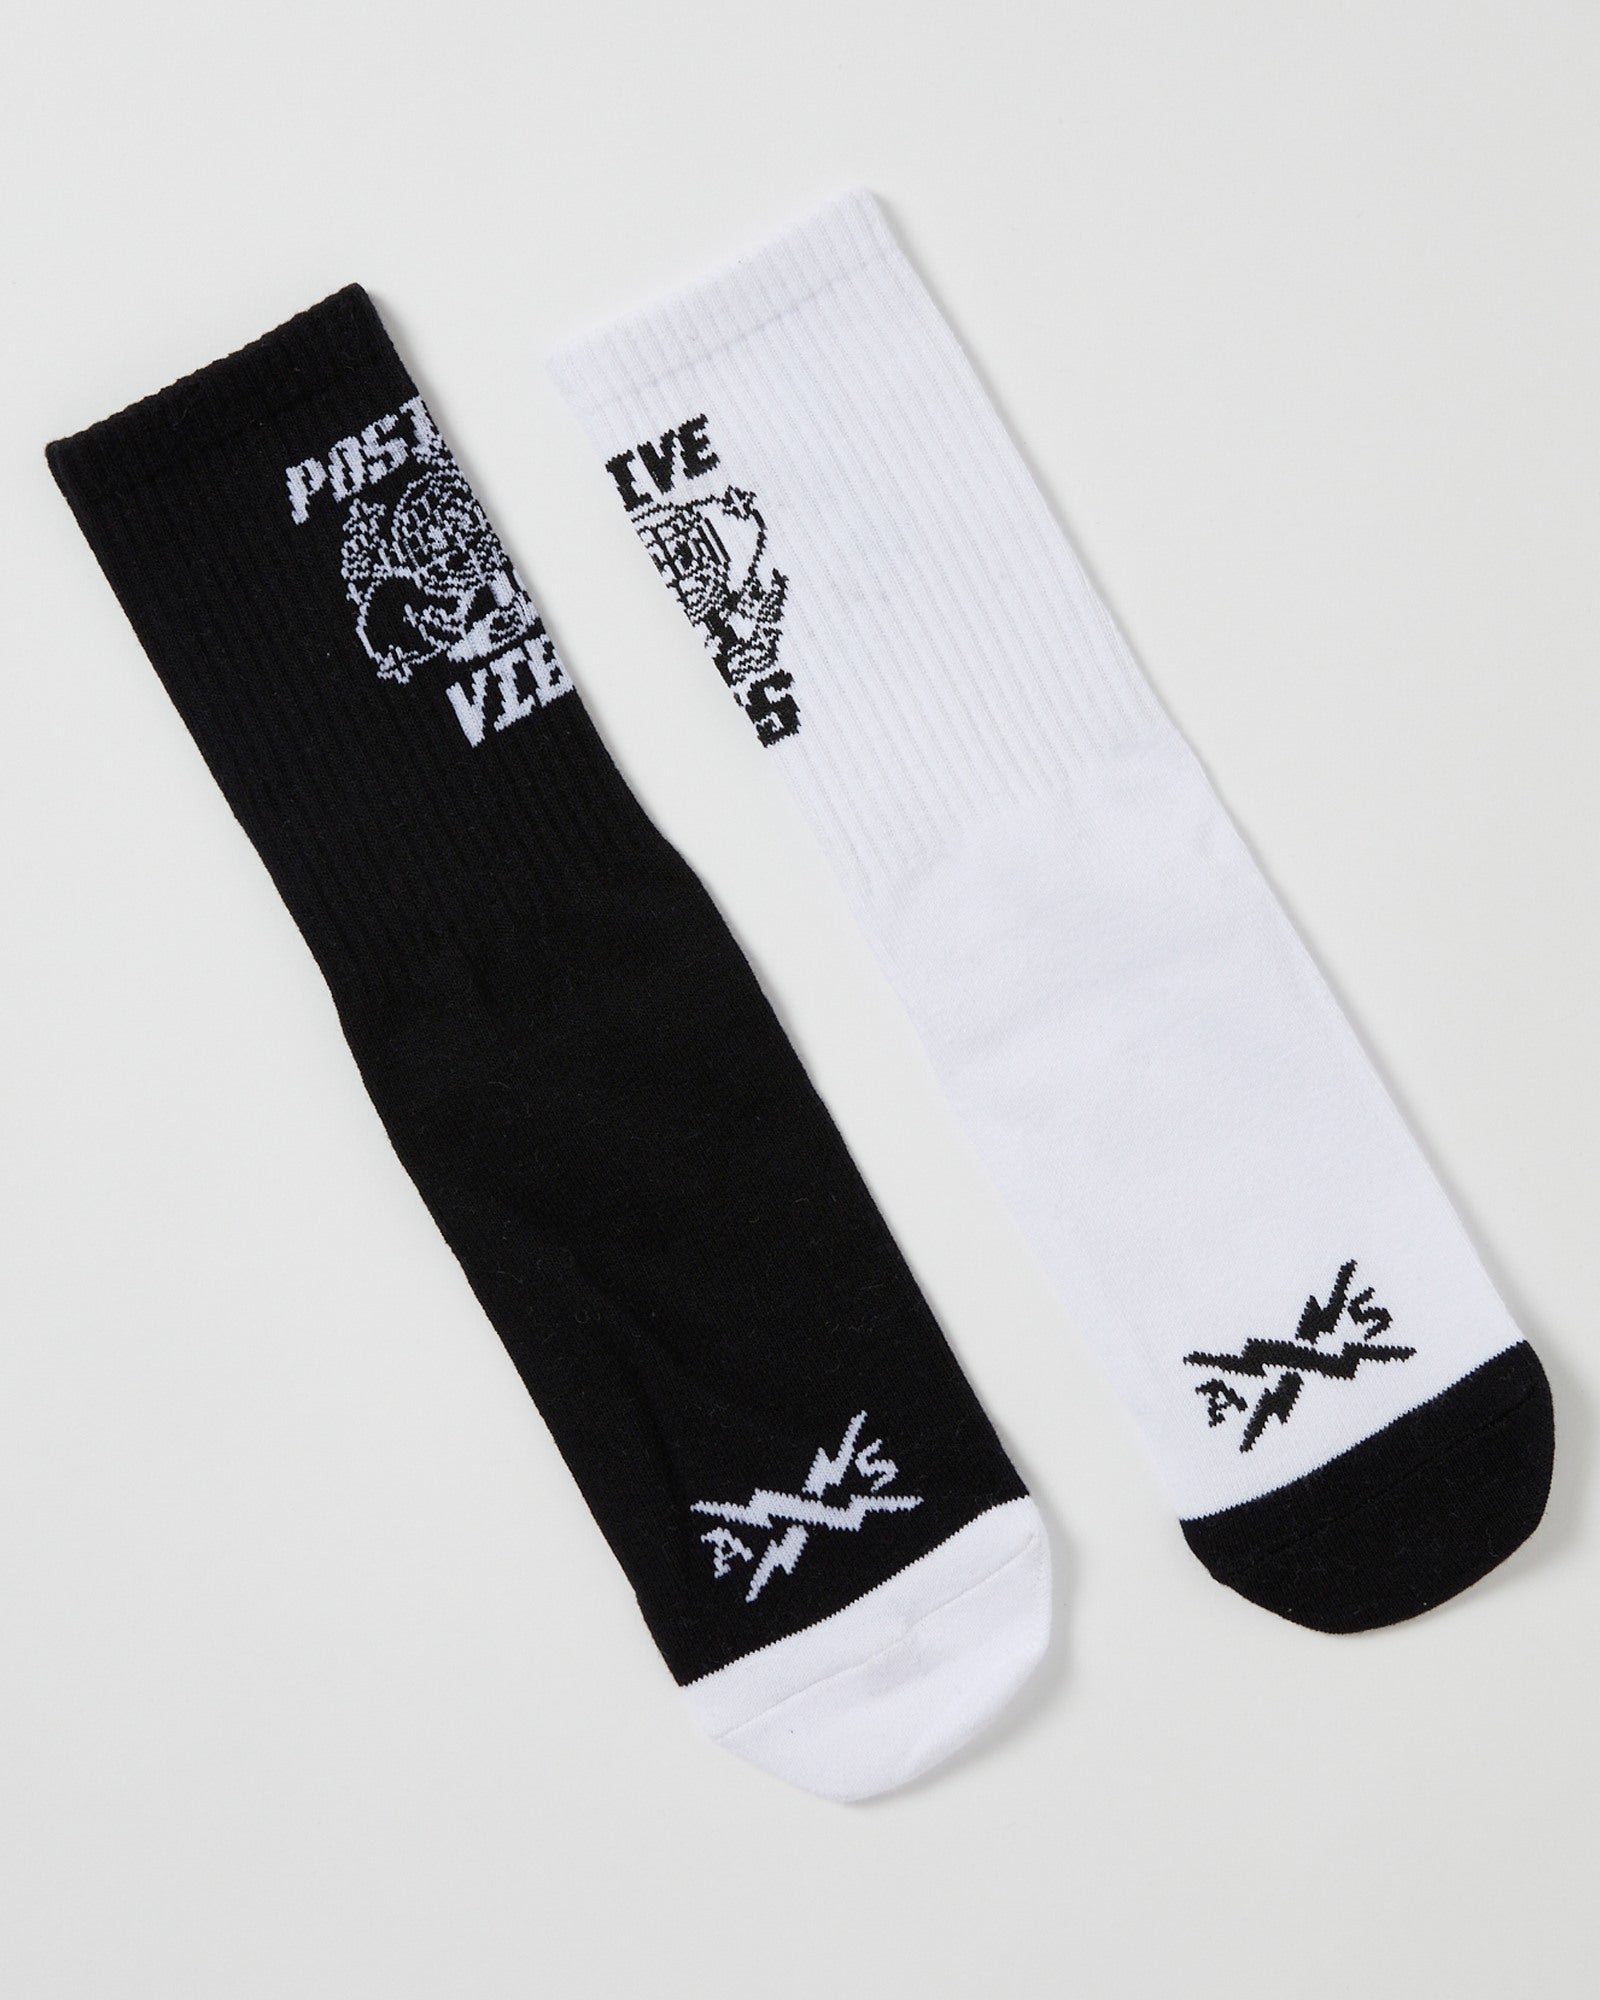 These black and white boys Vibes Socks by Alphabet Soup have no heel and fit all sizes. Made from a soft, stretchy fabric with a playful artwear "Positive Vibes" design on the leg and logo on the toe.